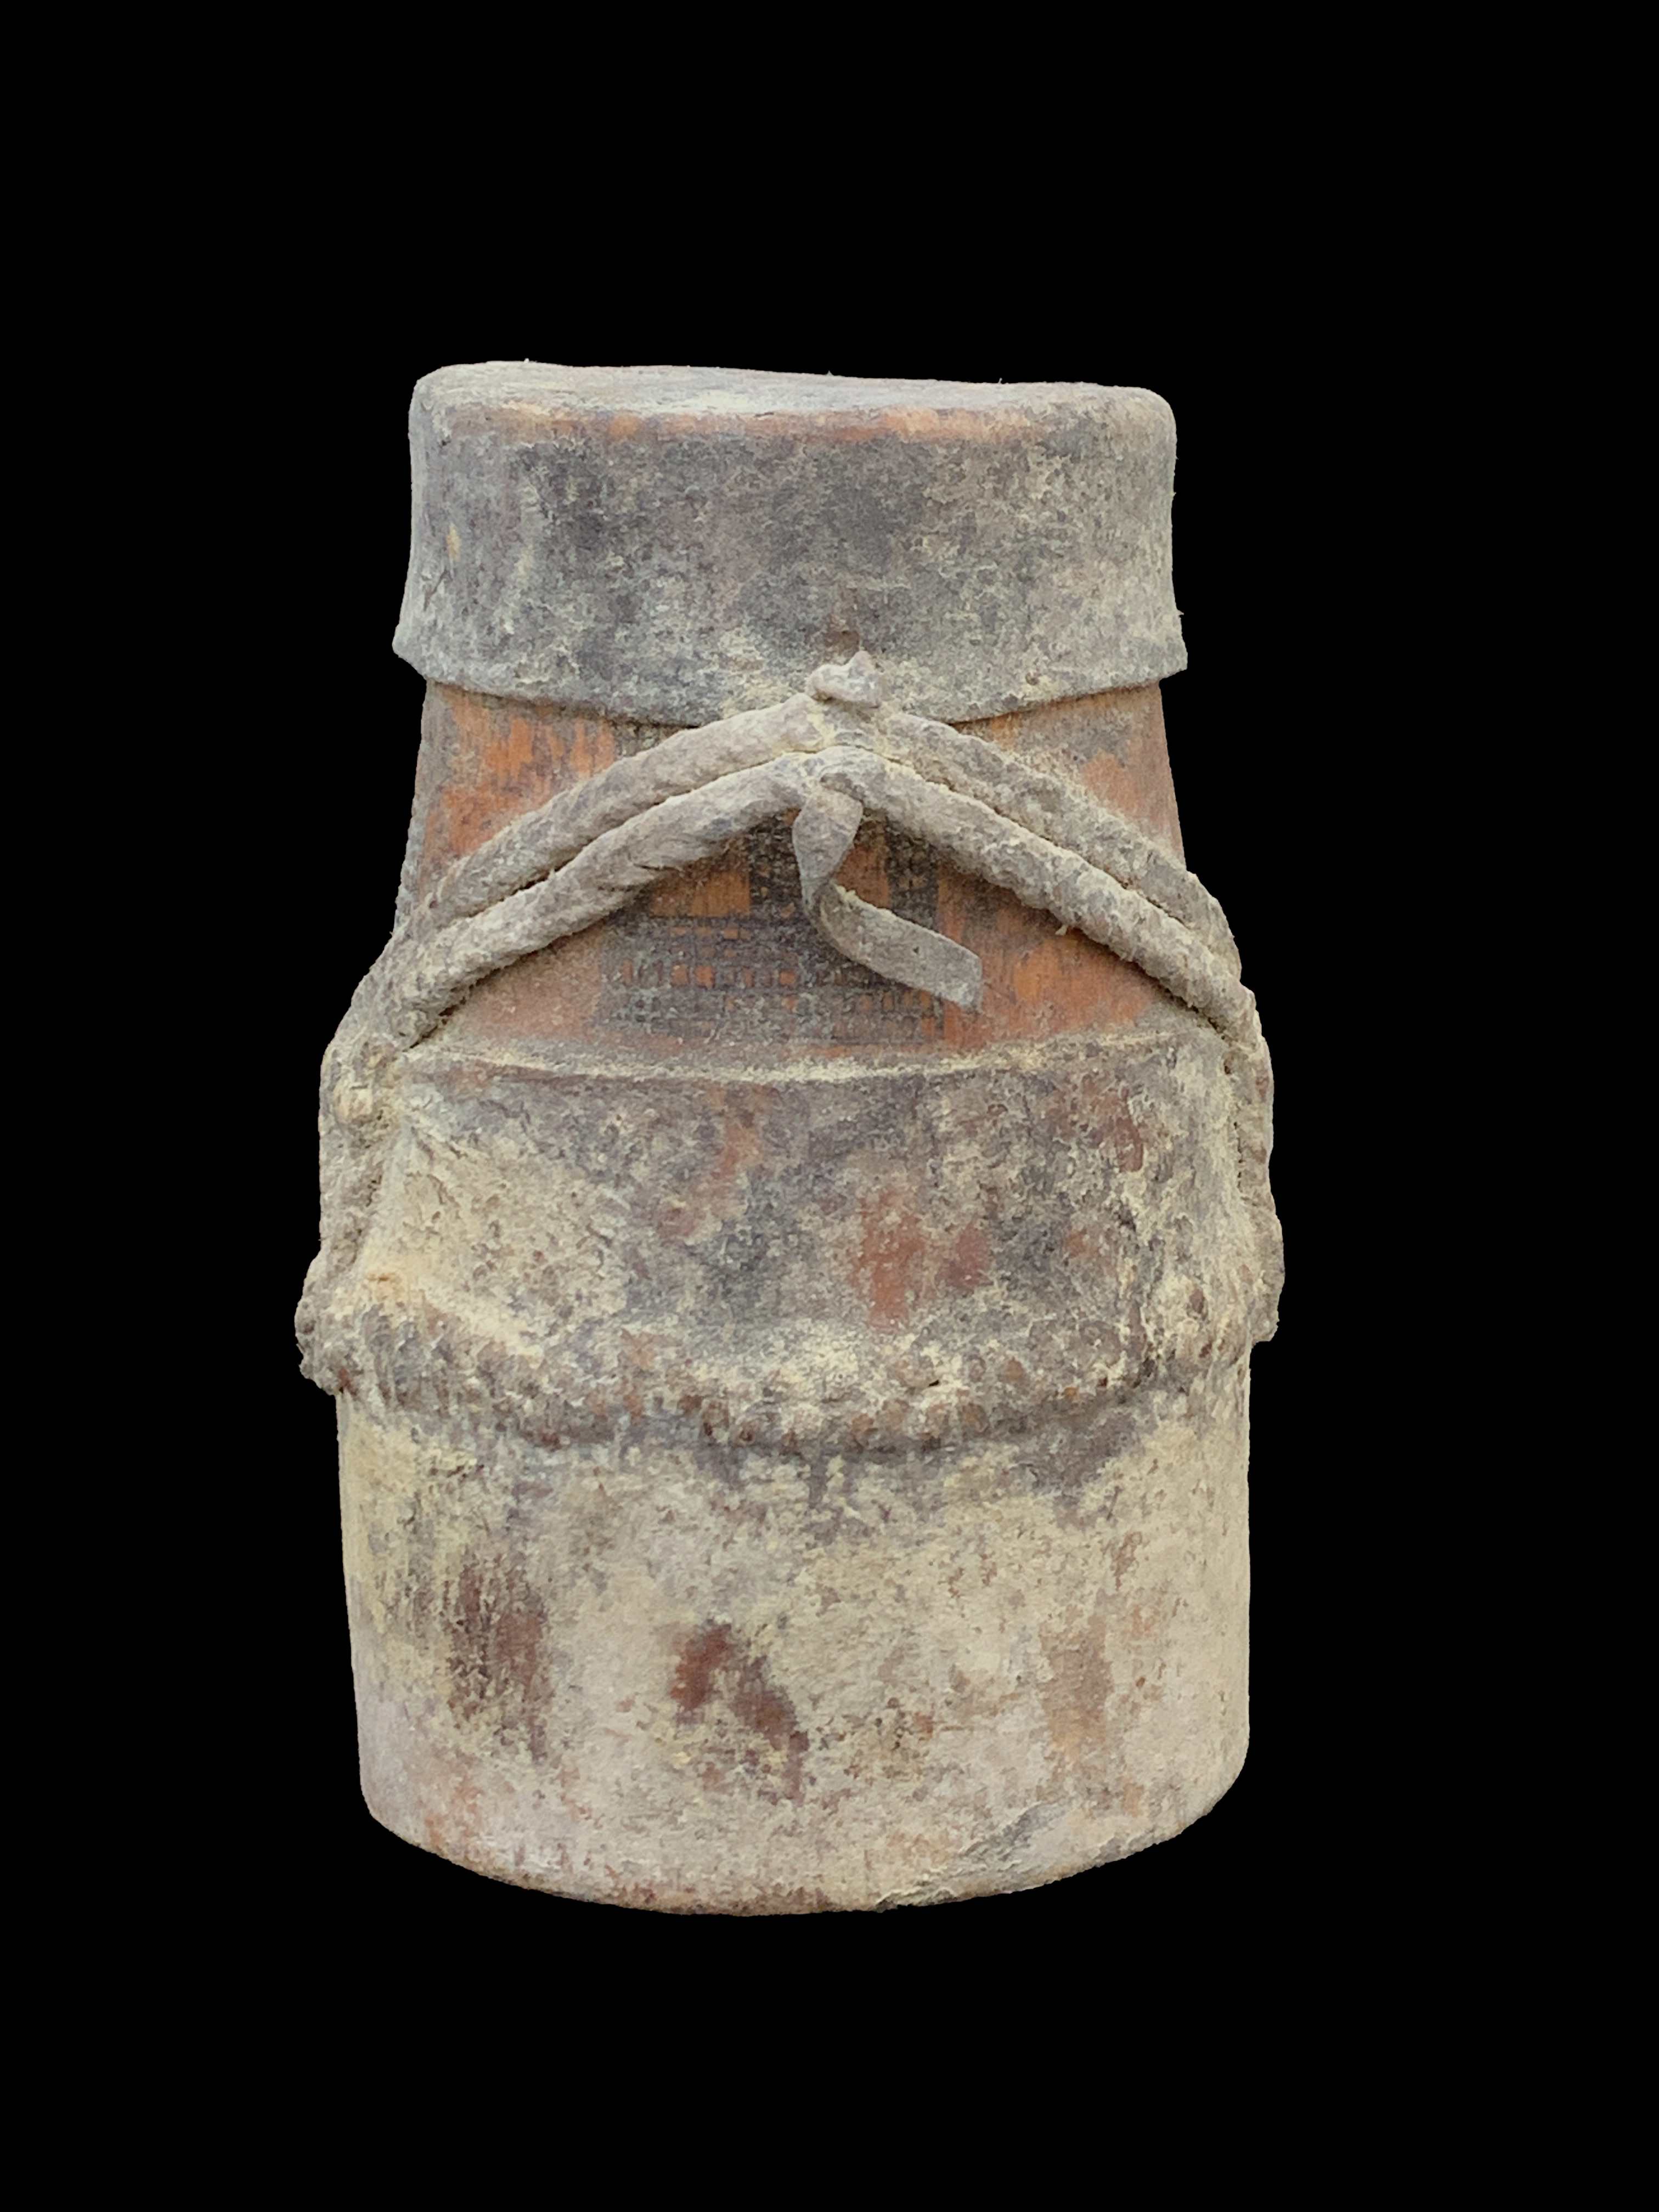 Single Meat Container (5) - Pokot and Turkana People, Northern Kenya